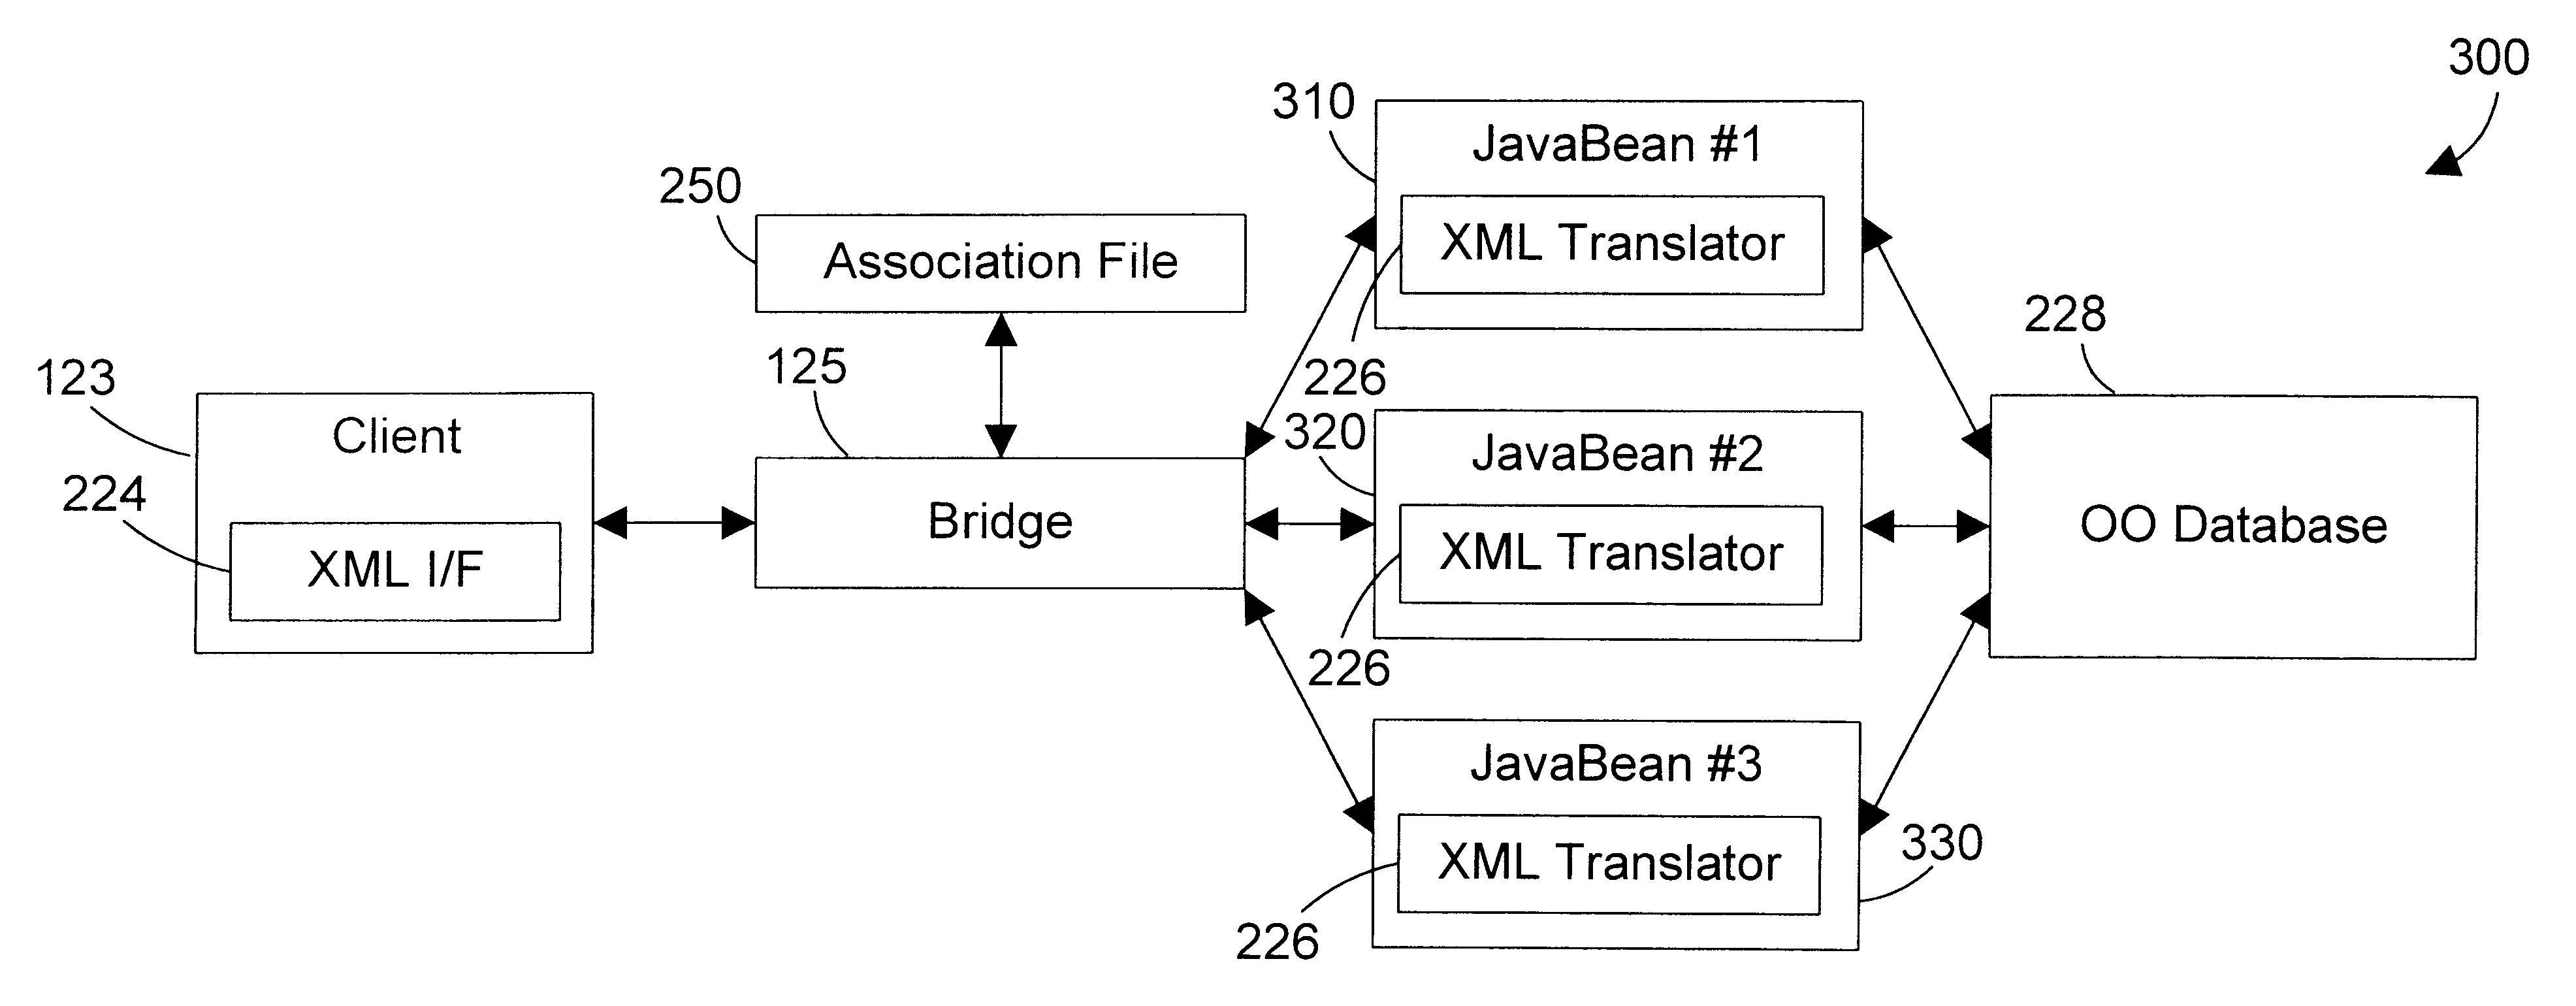 Tagged markup language interface with document type definition to access data in object oriented database